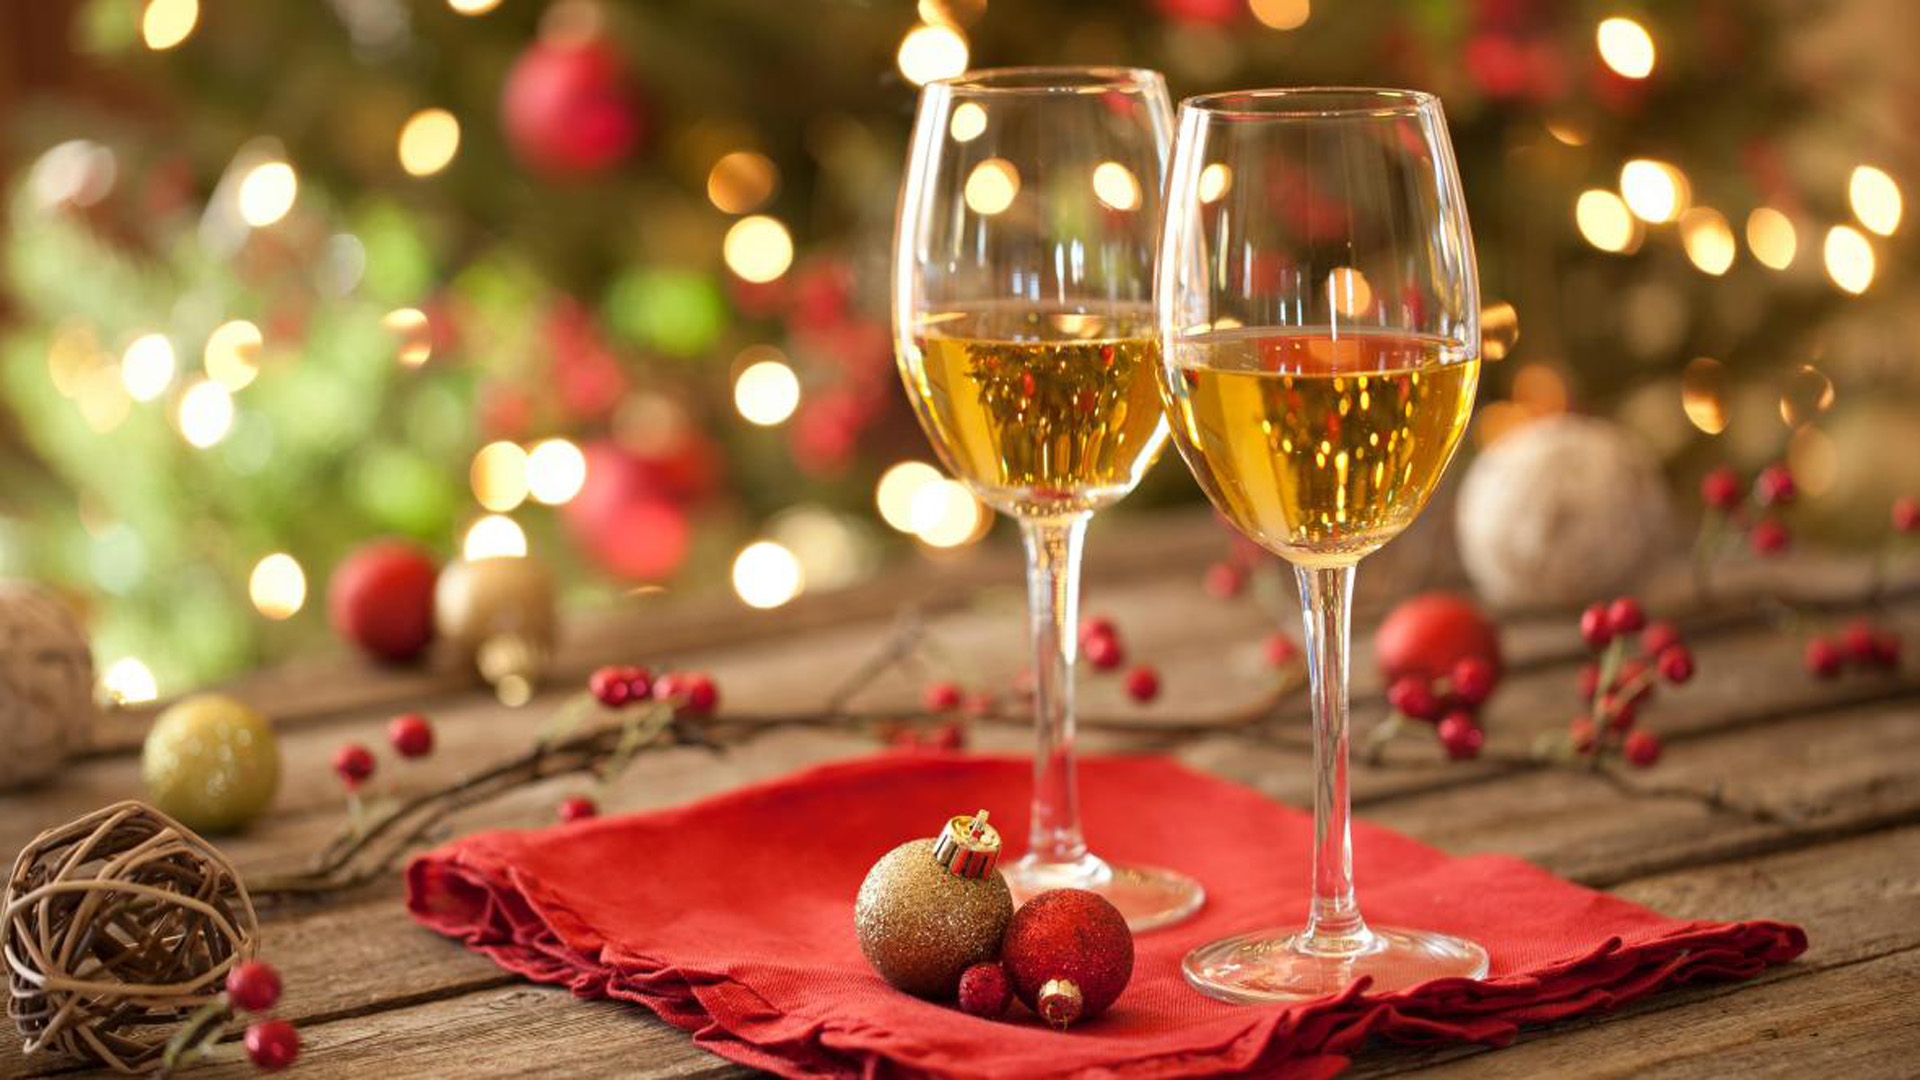 Merry Christmas Greeting Card Two Glasses With White Wine Christmas